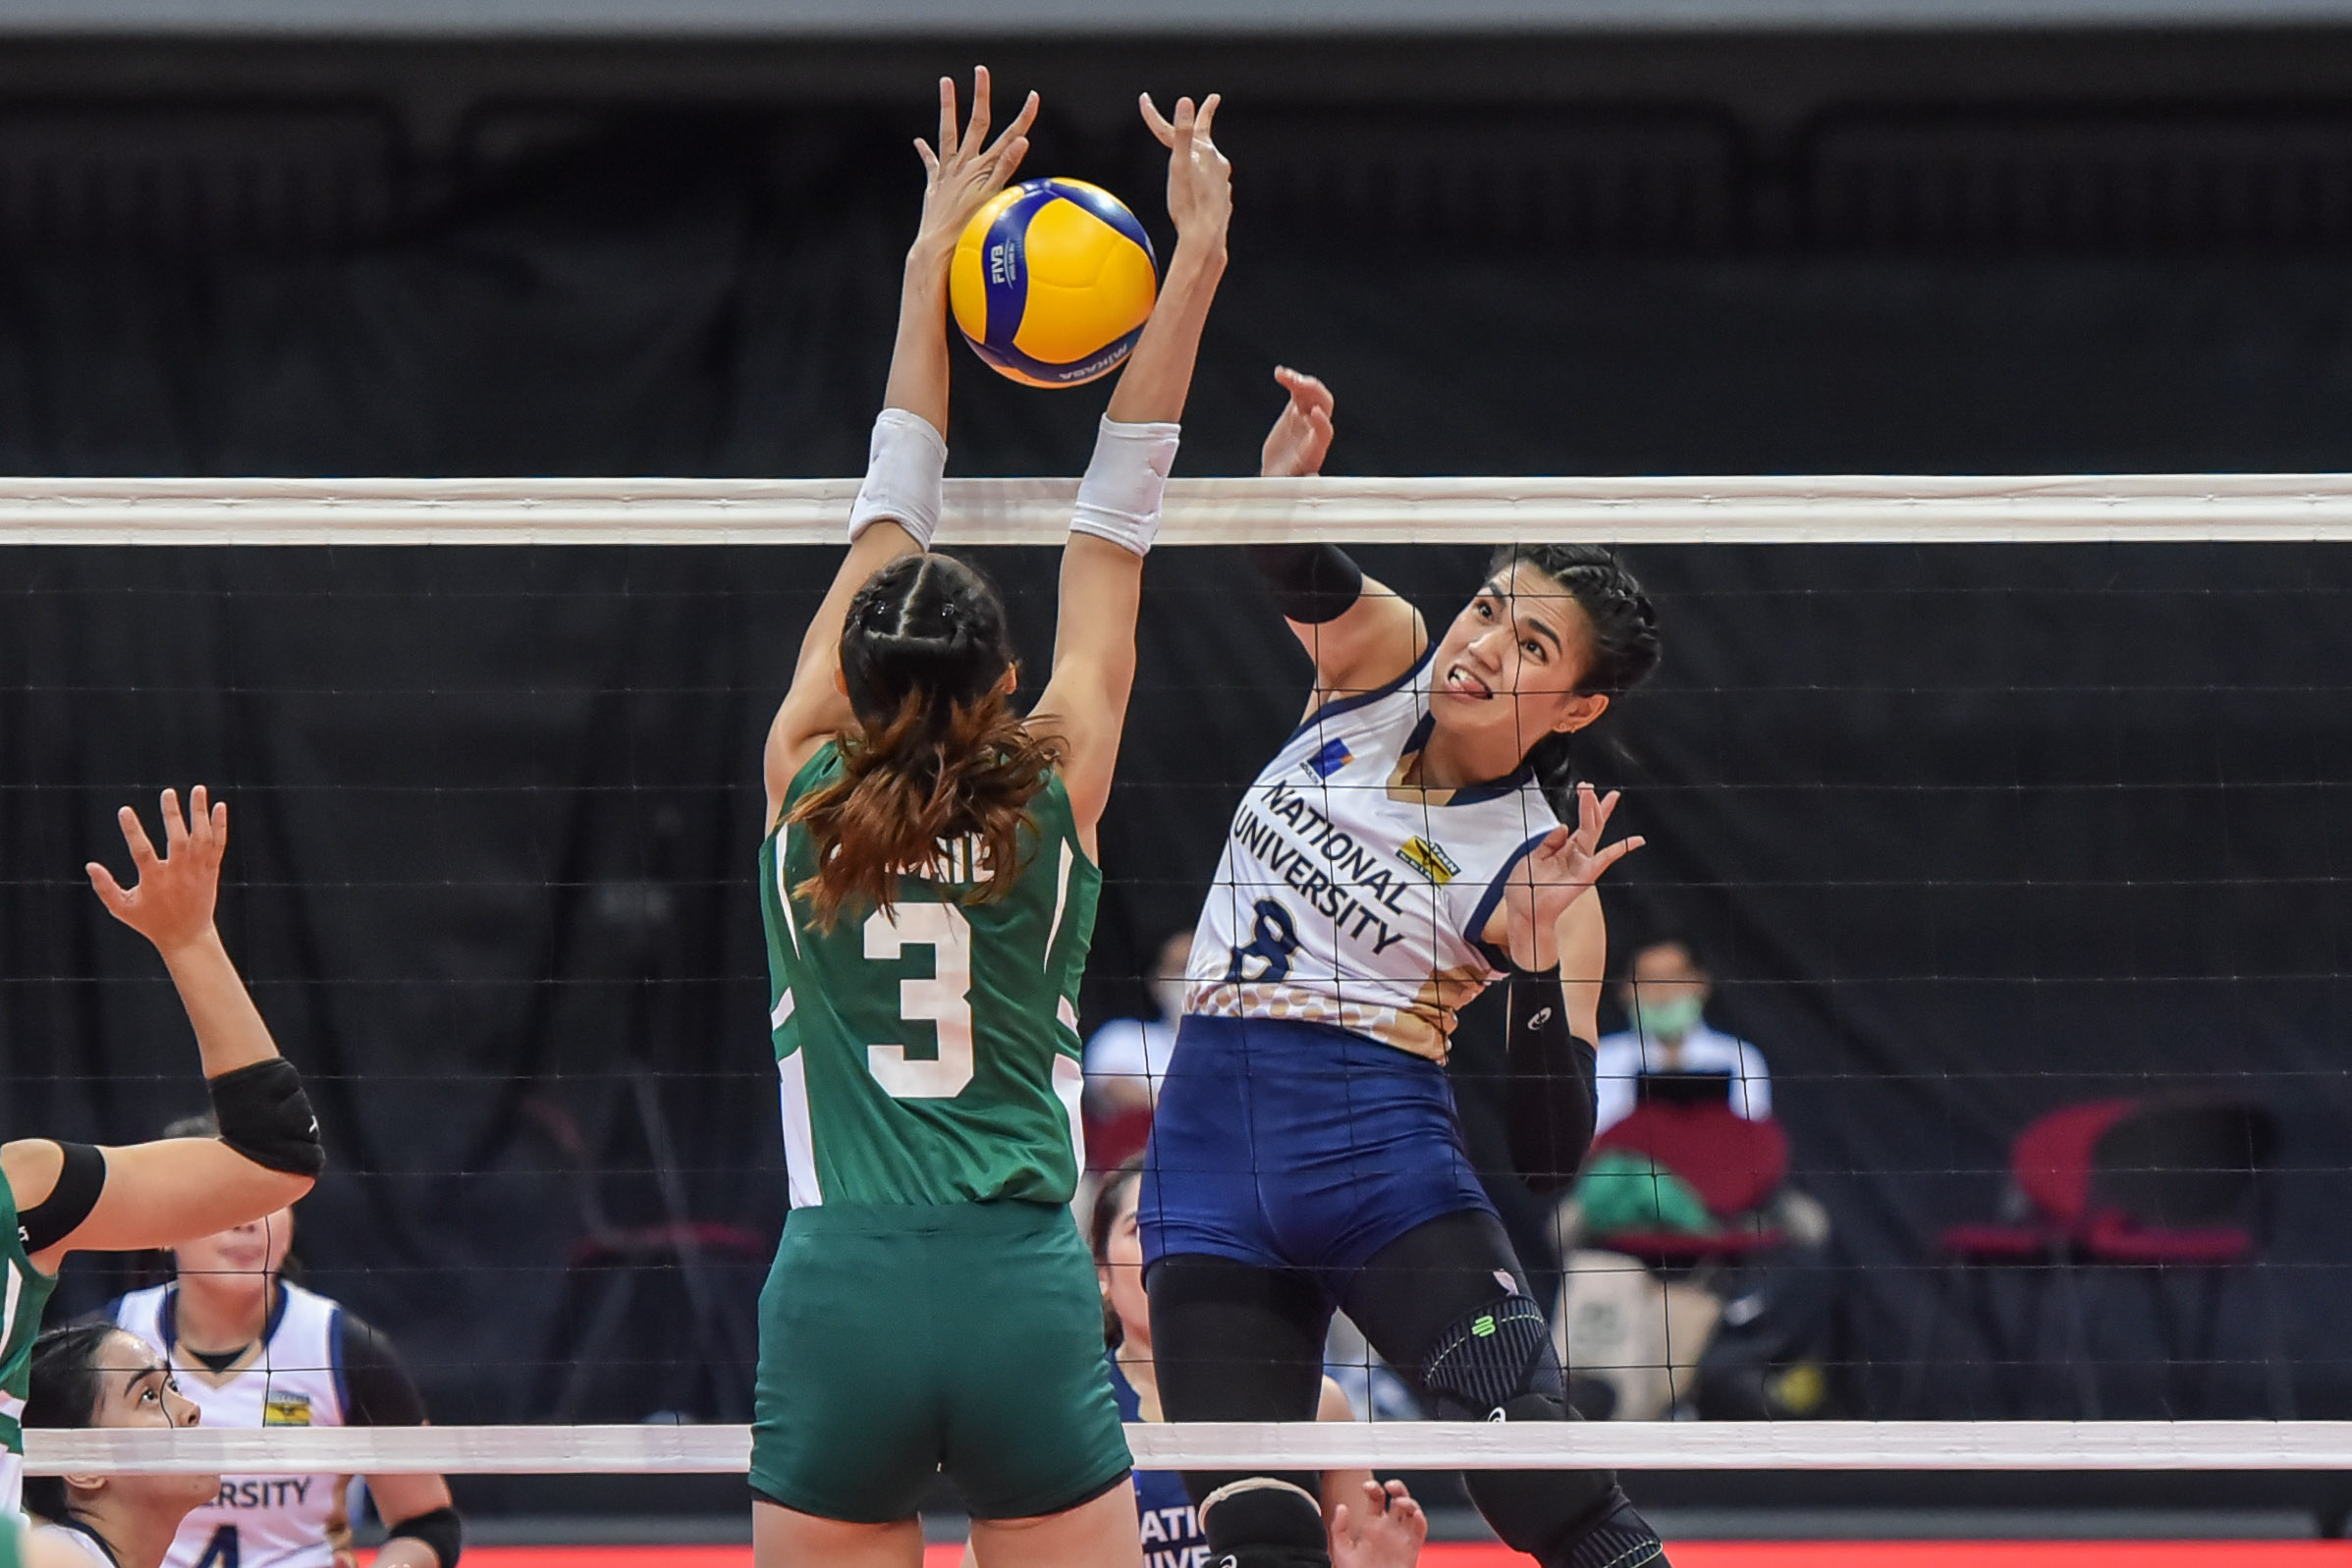 NU makes quick work of La Salle, cruises to 8-0 standing